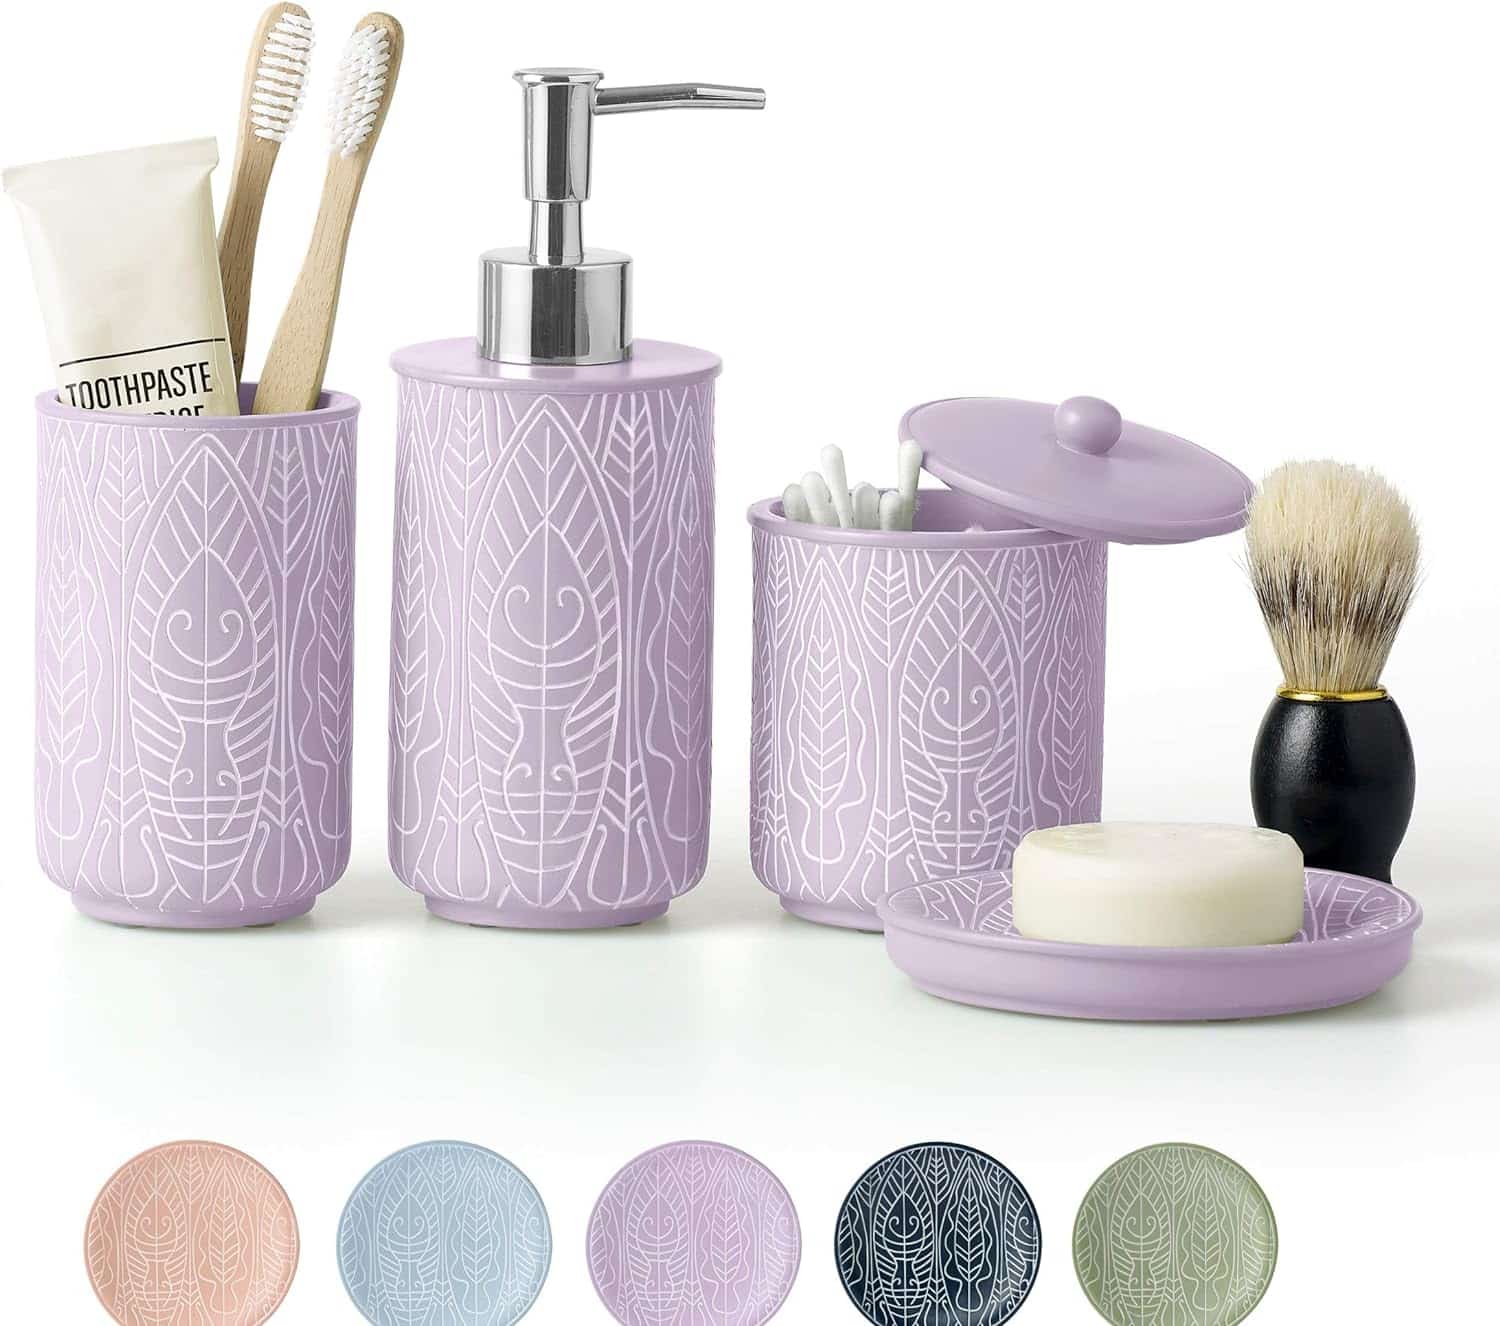 bathroom set in different colors